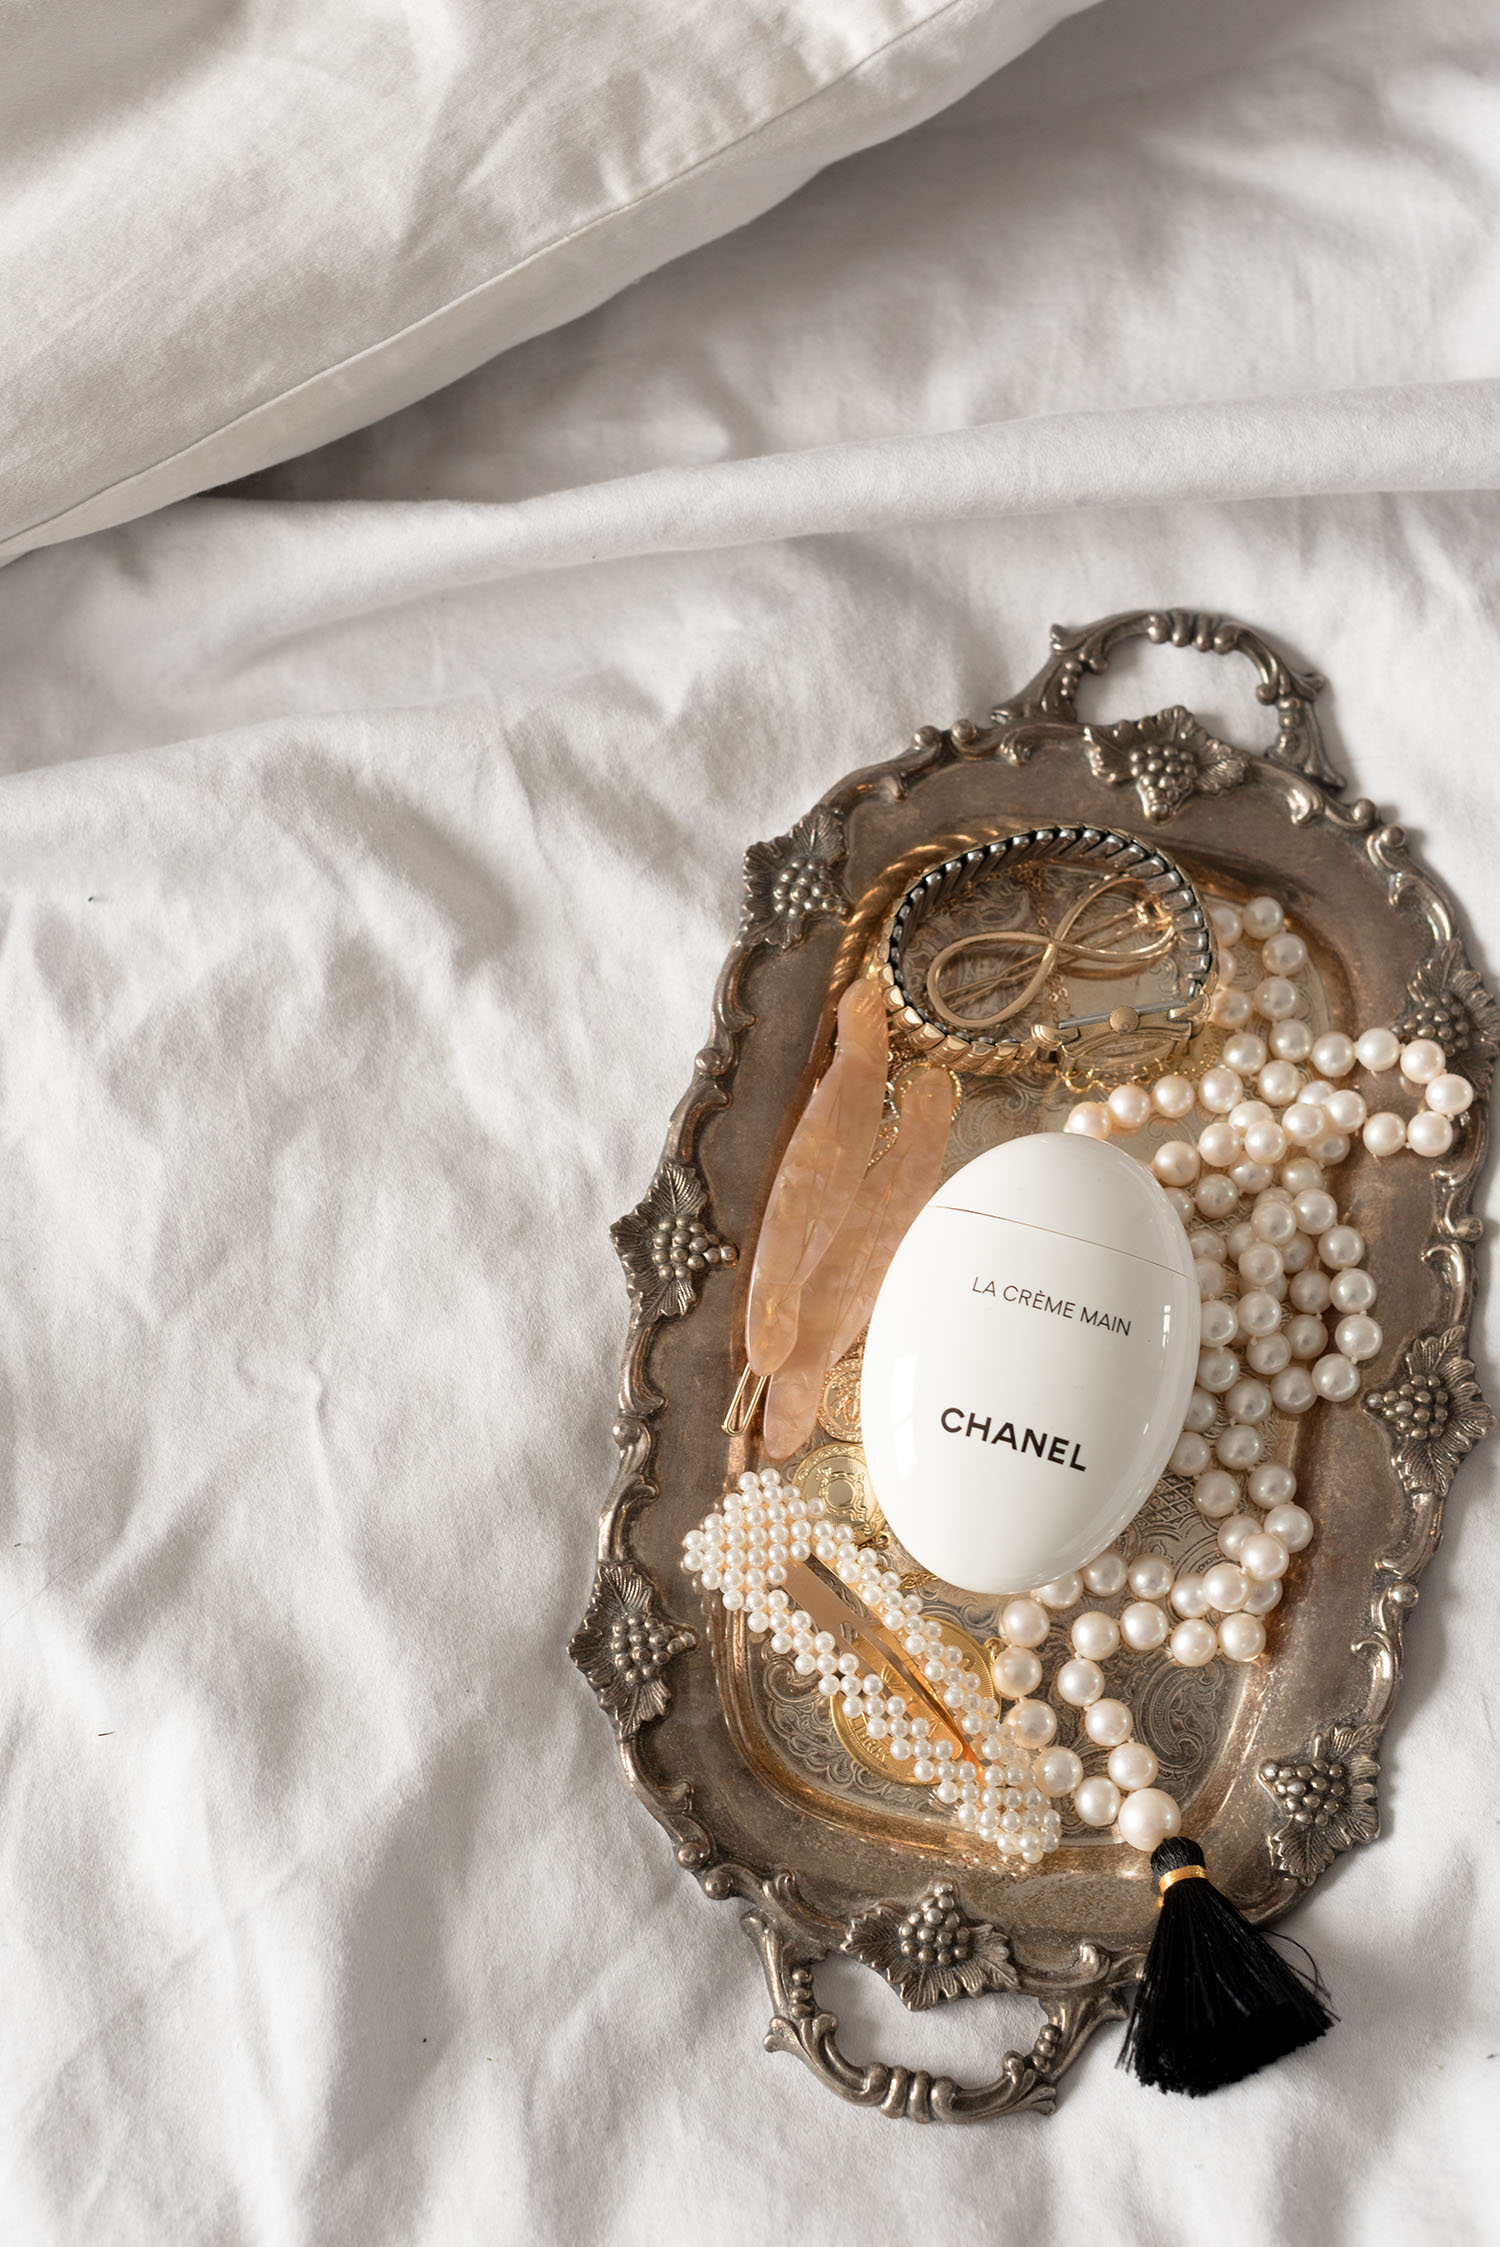 Chanel Beauty creme de main on a silver tray with pearl accessories, as captured by top Canadian beauty blogger Cee Fardoe of Coco & Vera